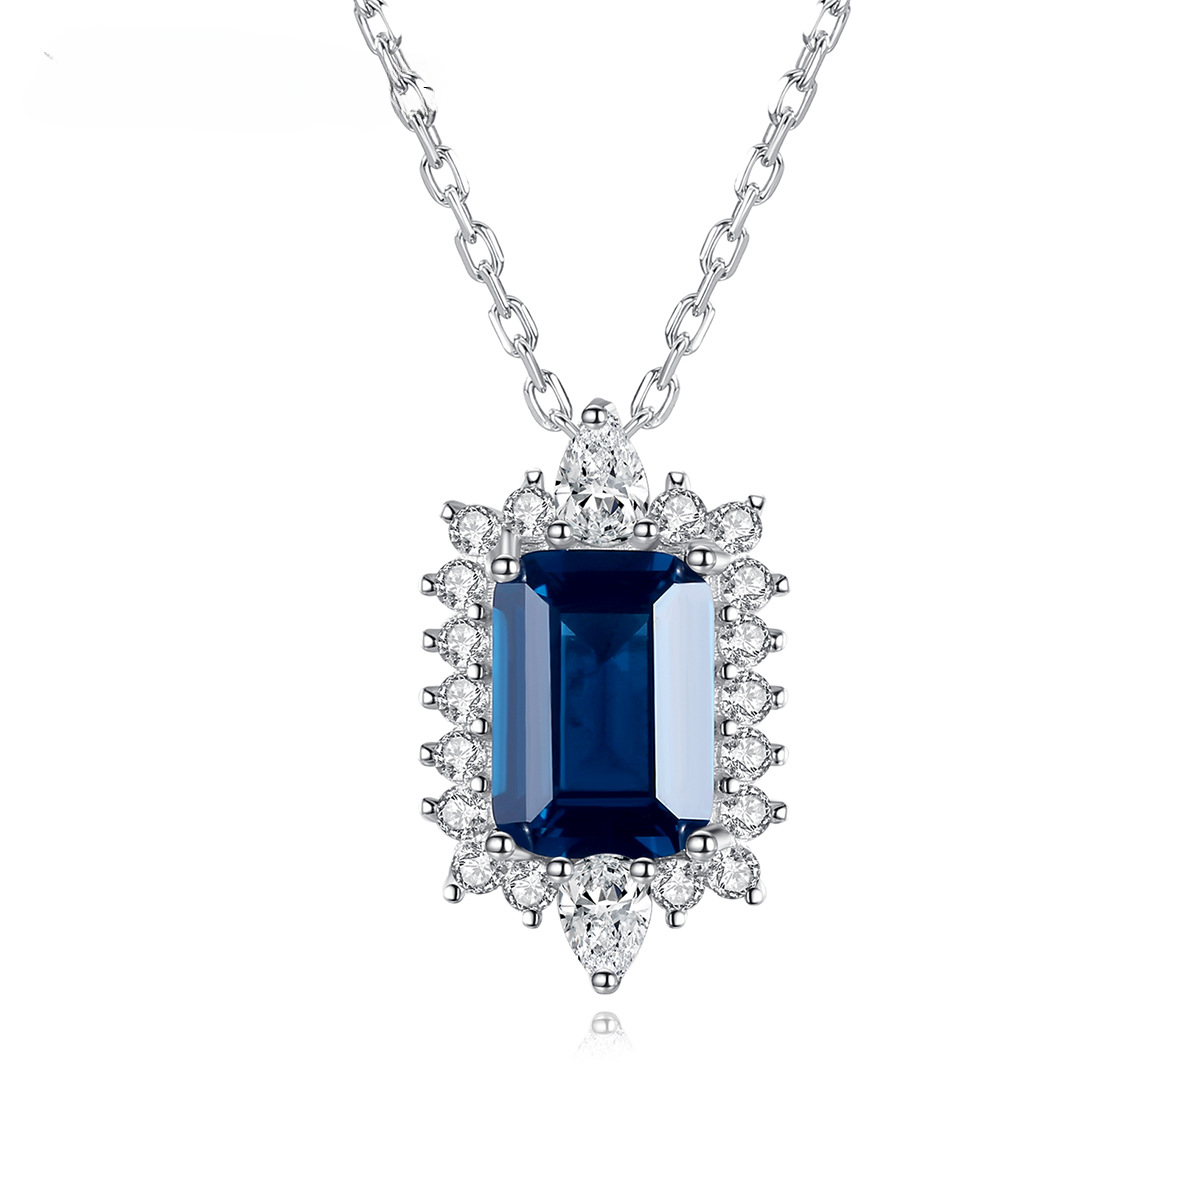 Gemstonely-925 Sterling Silver Necklace with Blue Simulate Sapphire Pendant - Elegant and Fashionable